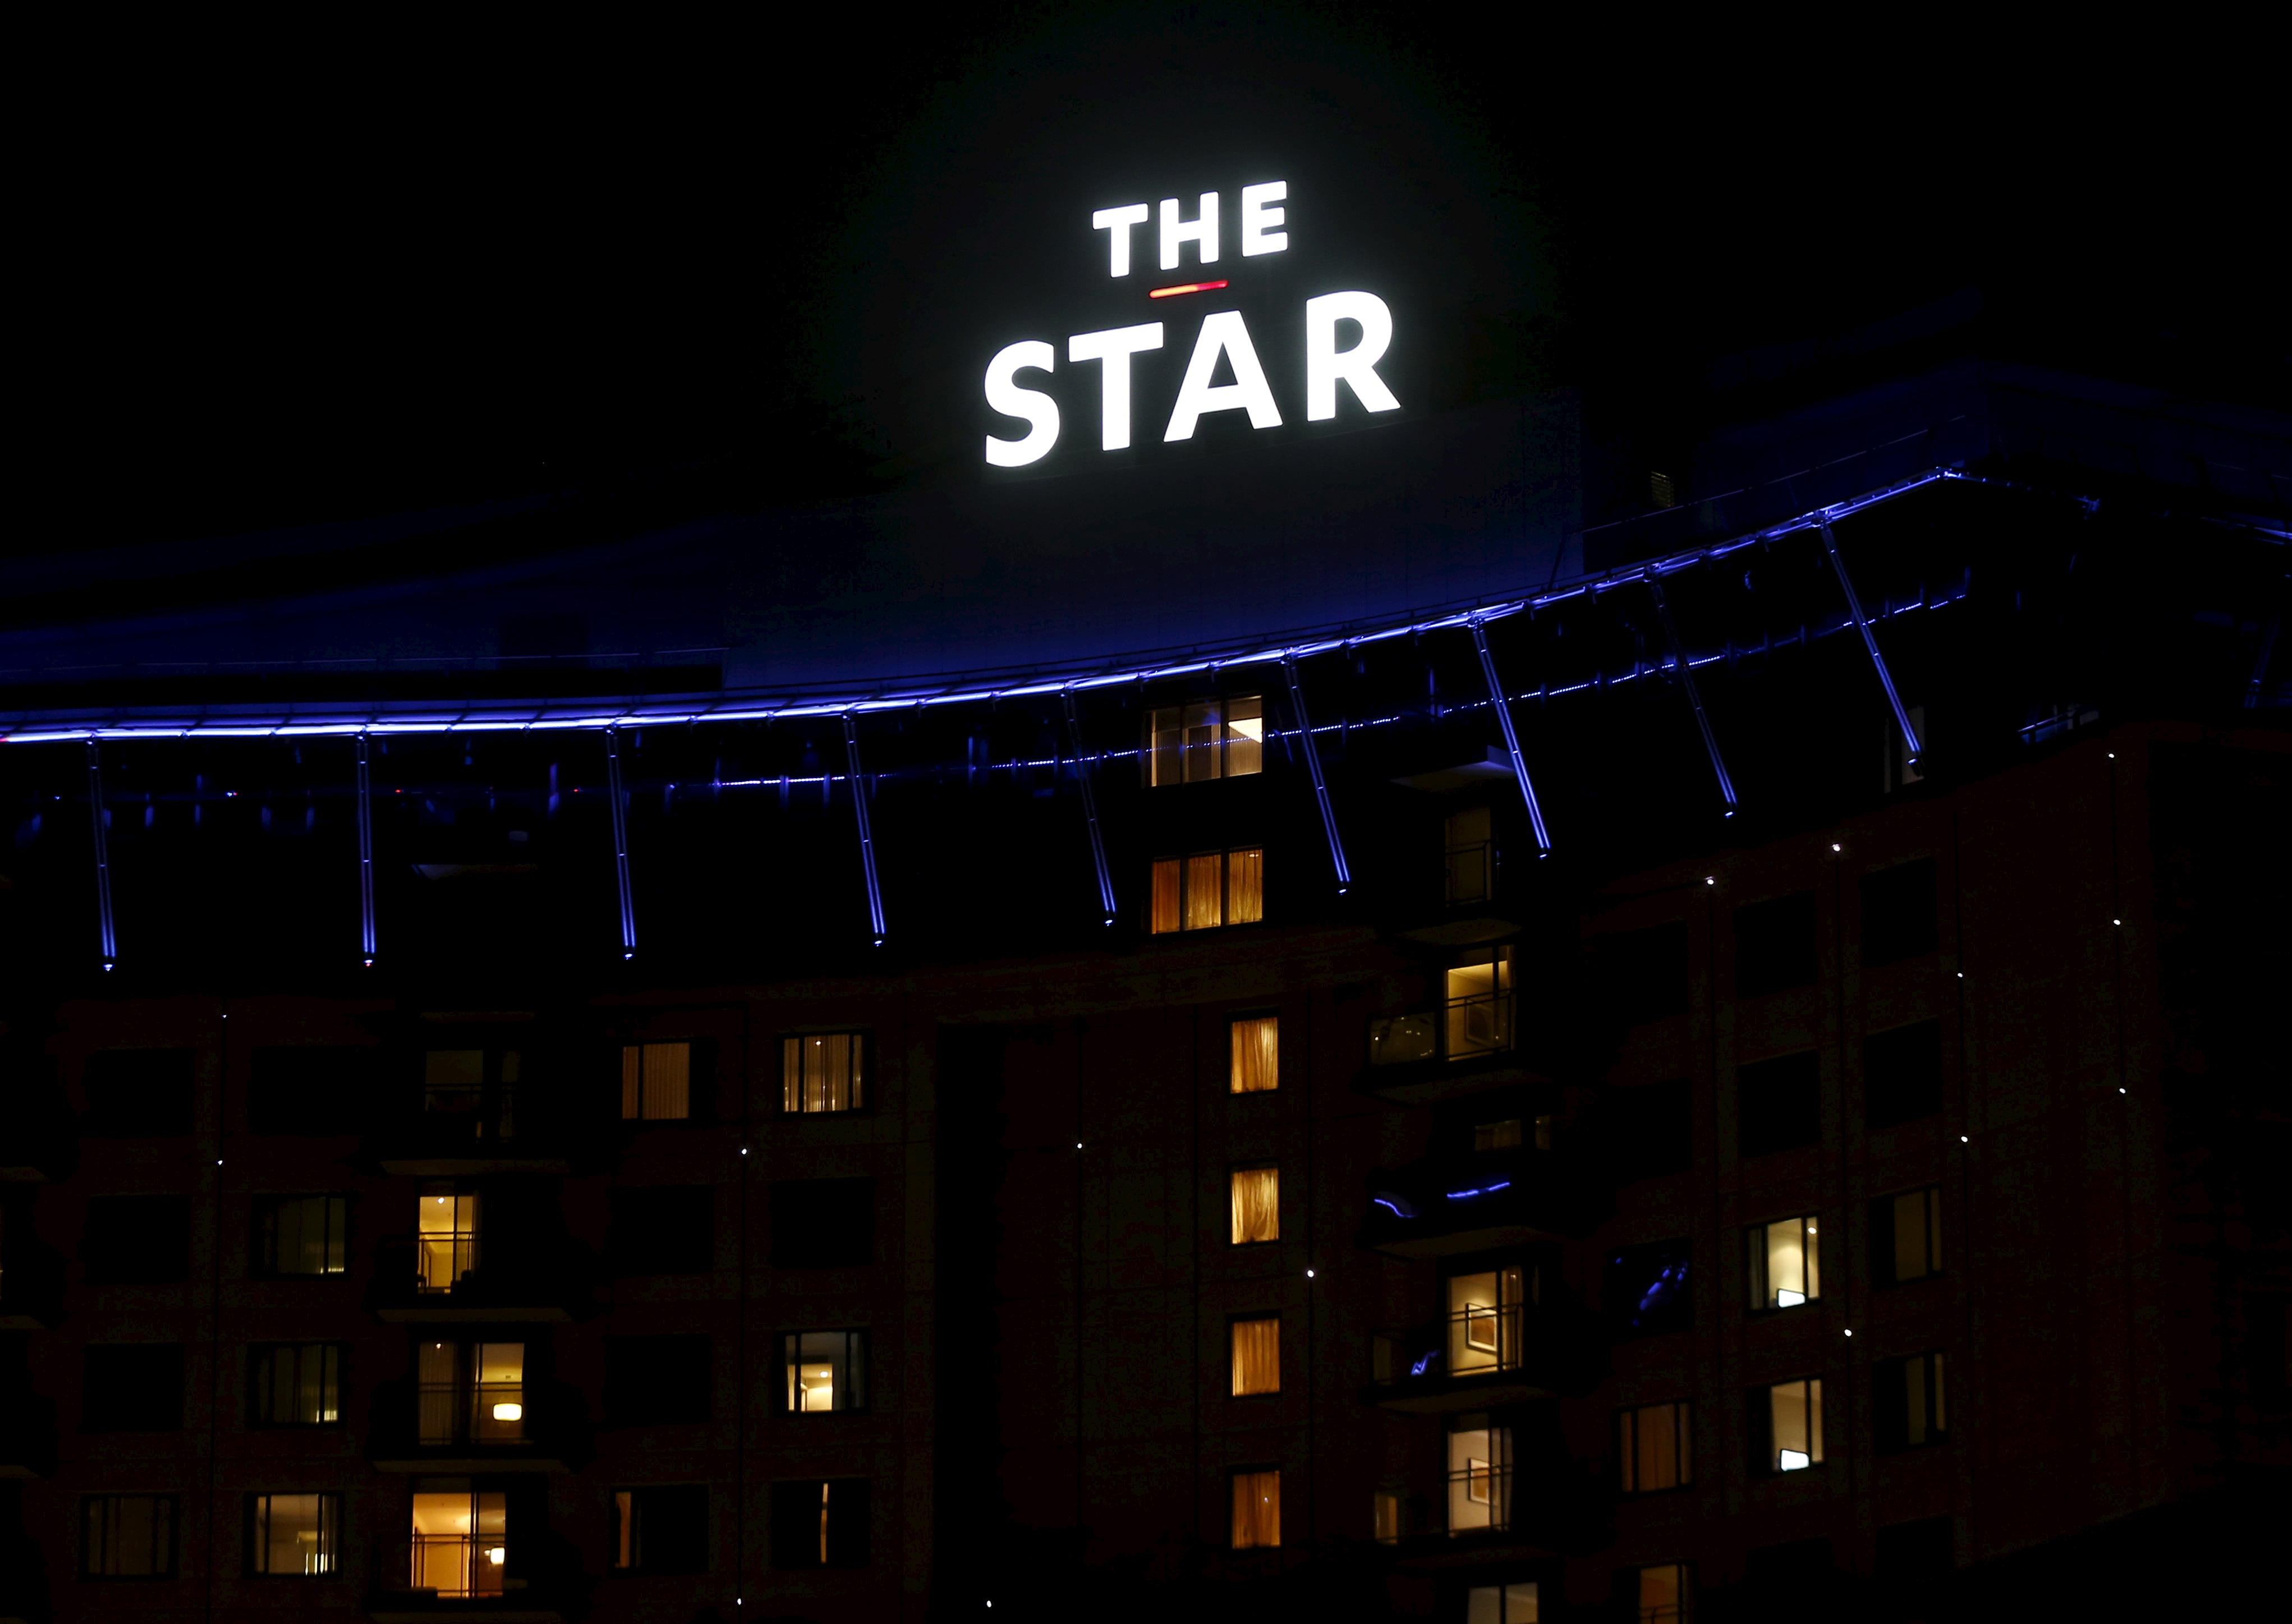 Guest rooms at a hotel above Sydney's Star Casino complex are seen illuminated at night